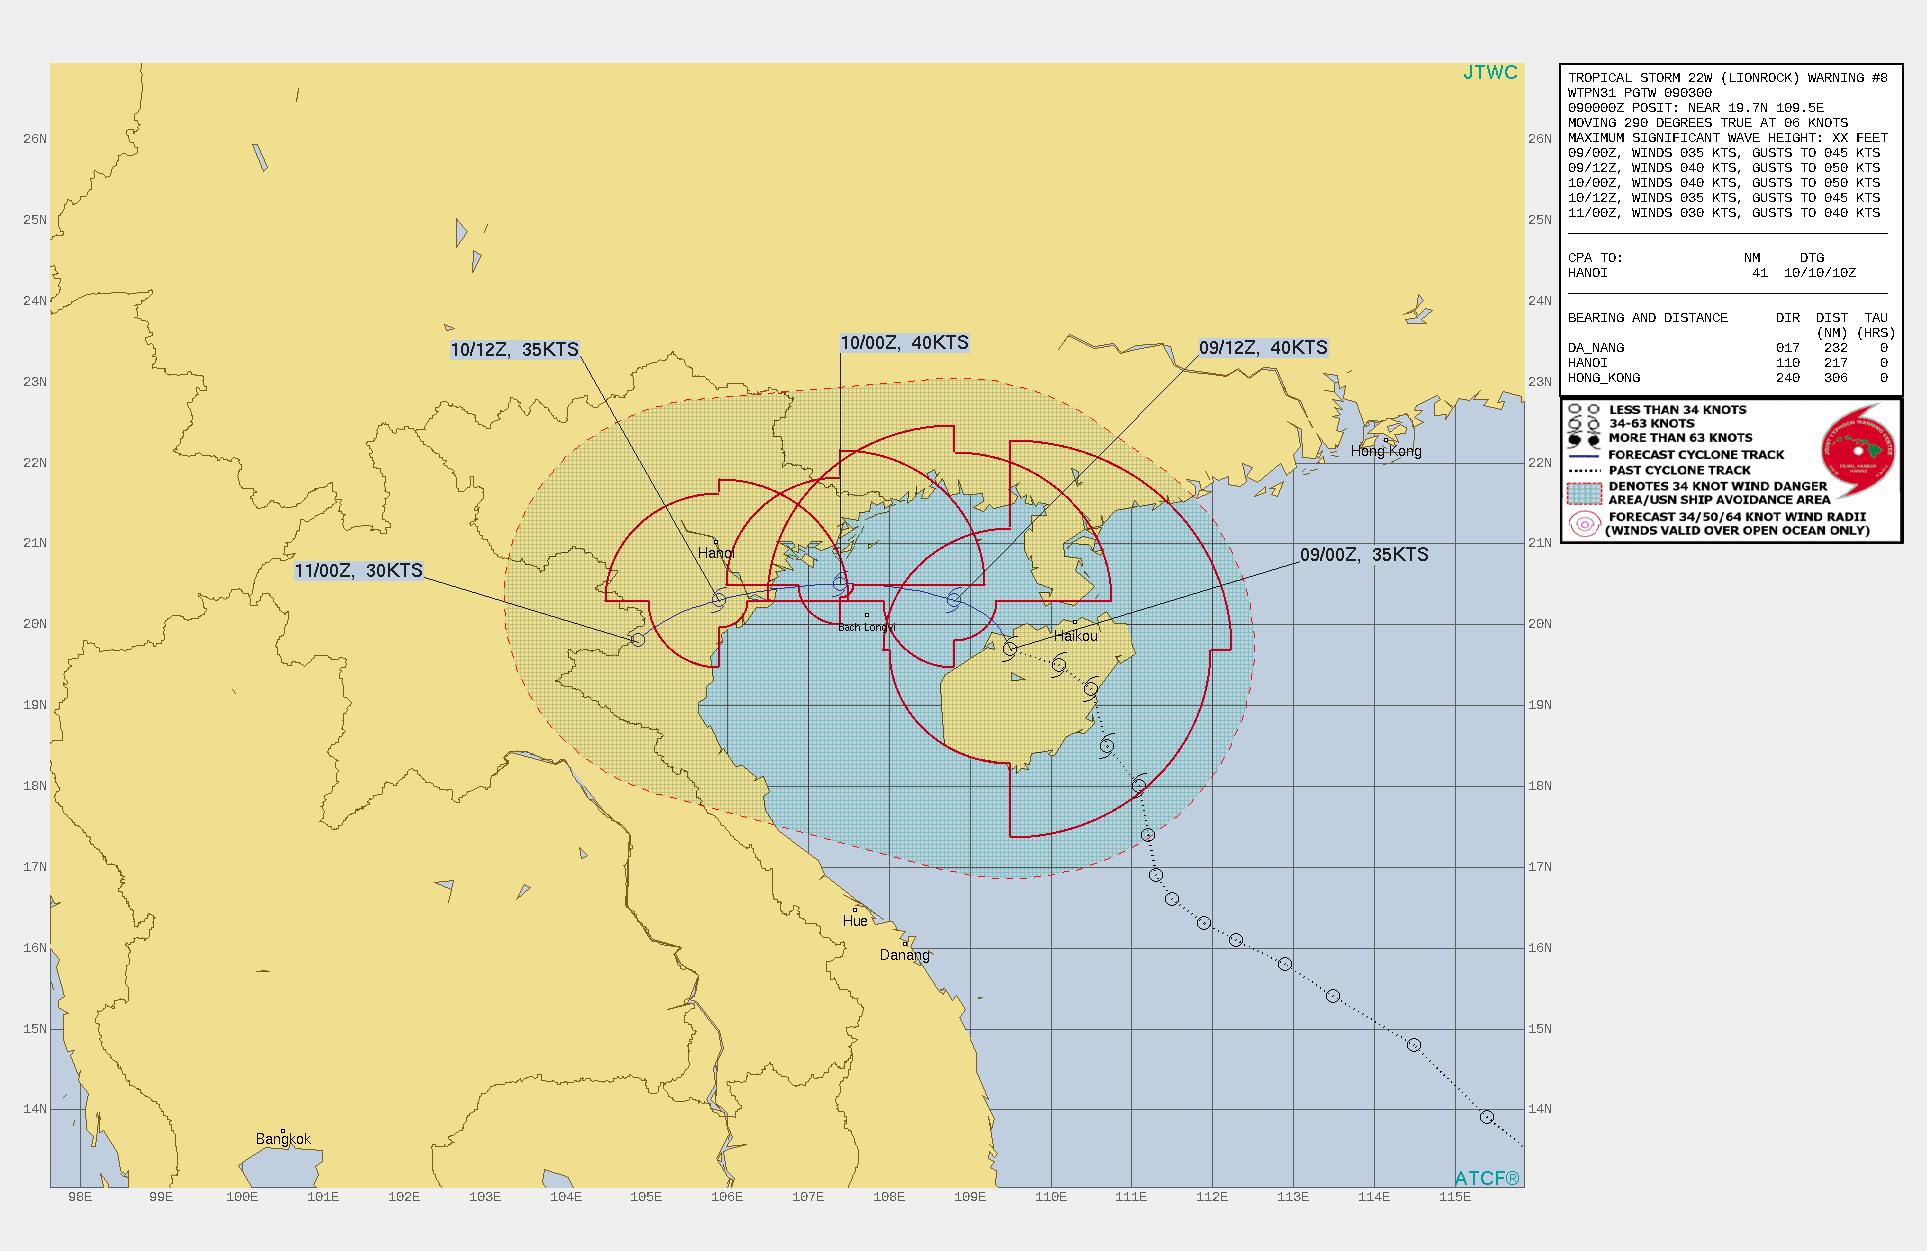 FORECAST REASONING.  SIGNIFICANT FORECAST CHANGES: THERE ARE NO SIGNIFICANT CHANGES TO THE FORECAST FROM THE PREVIOUS WARNING.  FORECAST DISCUSSION: TS 22W CONTINUES TO TRACK SLOWLY WEST-NORTHWESTWARD OVER HAINAN, EXITING WITHIN THE NEXT FEW HOURS INTO THE GULF OF TONKIN. OVER THE NEXT 12 HOURS, LIONROCK WILL MOVE BACK OVER THE WARM WATERS AND THE UPPER LEVEL OUTFLOW WILL ENHANCE THE INTENSITY GRADUALLY TO 40 KNOTS. TS 22W IS EXPECTED TO CONTINUE MOVING ON A WEST-NORTHWESTWARD TRACK AND THEN TURN SLIGHTLY MORE TO THE WEST-SOUTHWEST JUST BEFORE MAKING LANDFALL JUST SOUTHEAST OF HANOI, VIETNAM. ONCE THE SYSTEM MAKES LANDFALL IT WILL RAPIDLY DECREASE INTENSITY AS IT INTERACTS WITH THE RUGGED TERRAIN AND BEGIN THE DISSIPATION PROCESS STARTING AT 36H AND DISSIPATE NEAR THE FAR WESTERN BORDER OF VIETNAM AND LAOS BY 48H.